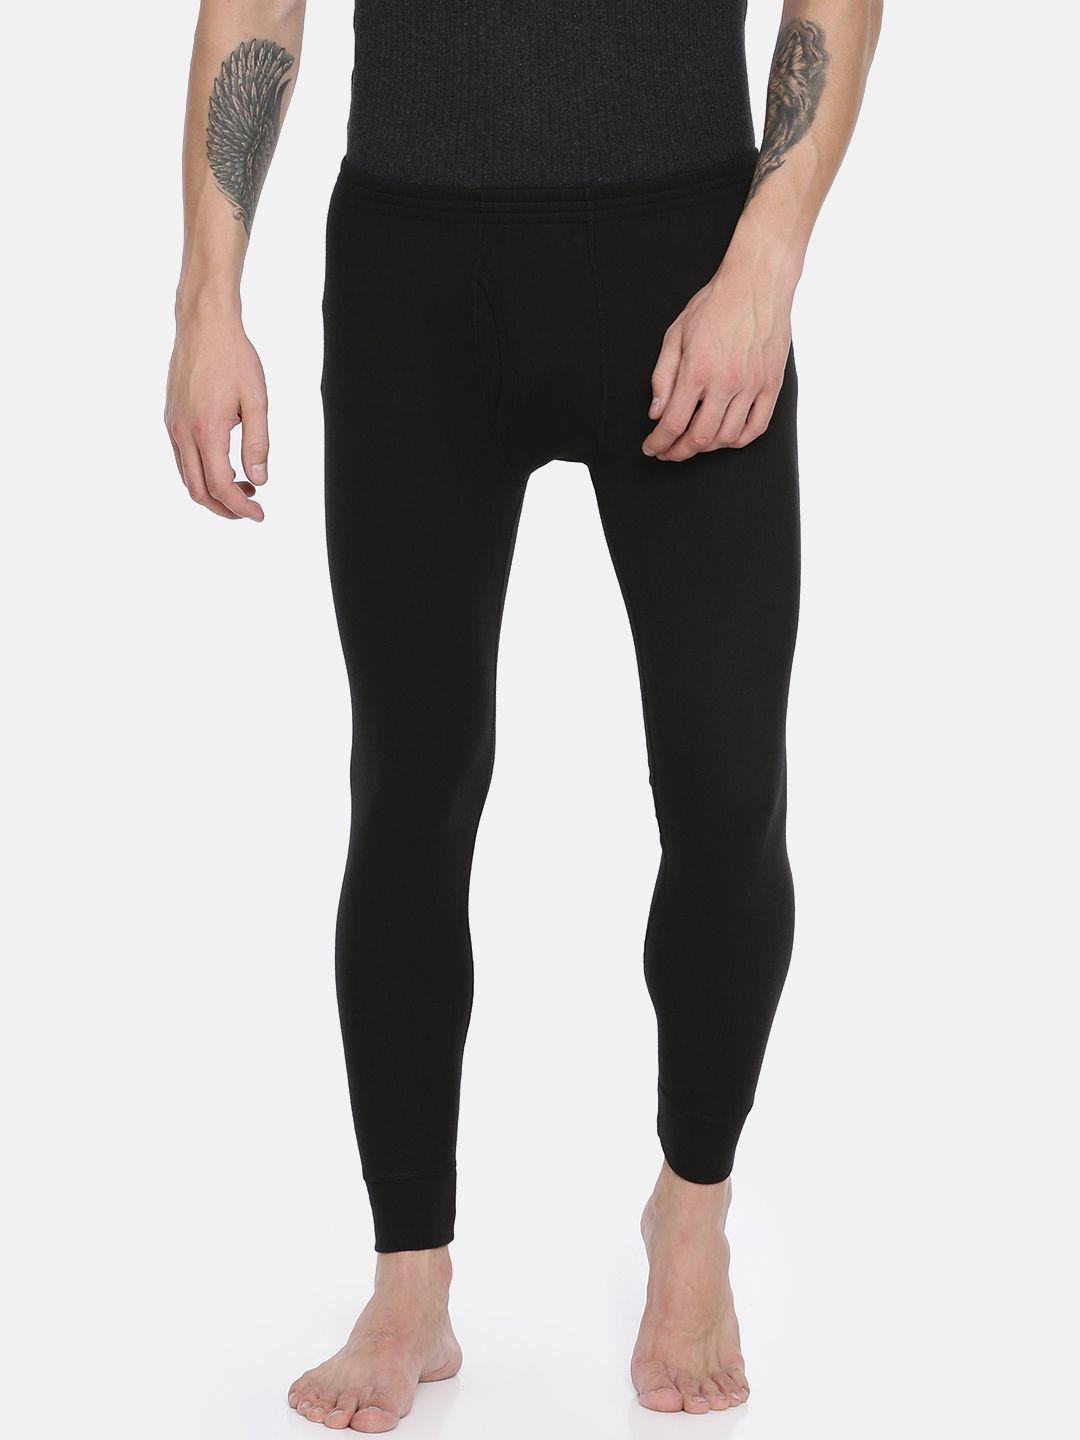 u.s. polo assn. men black solid thermal bottoms